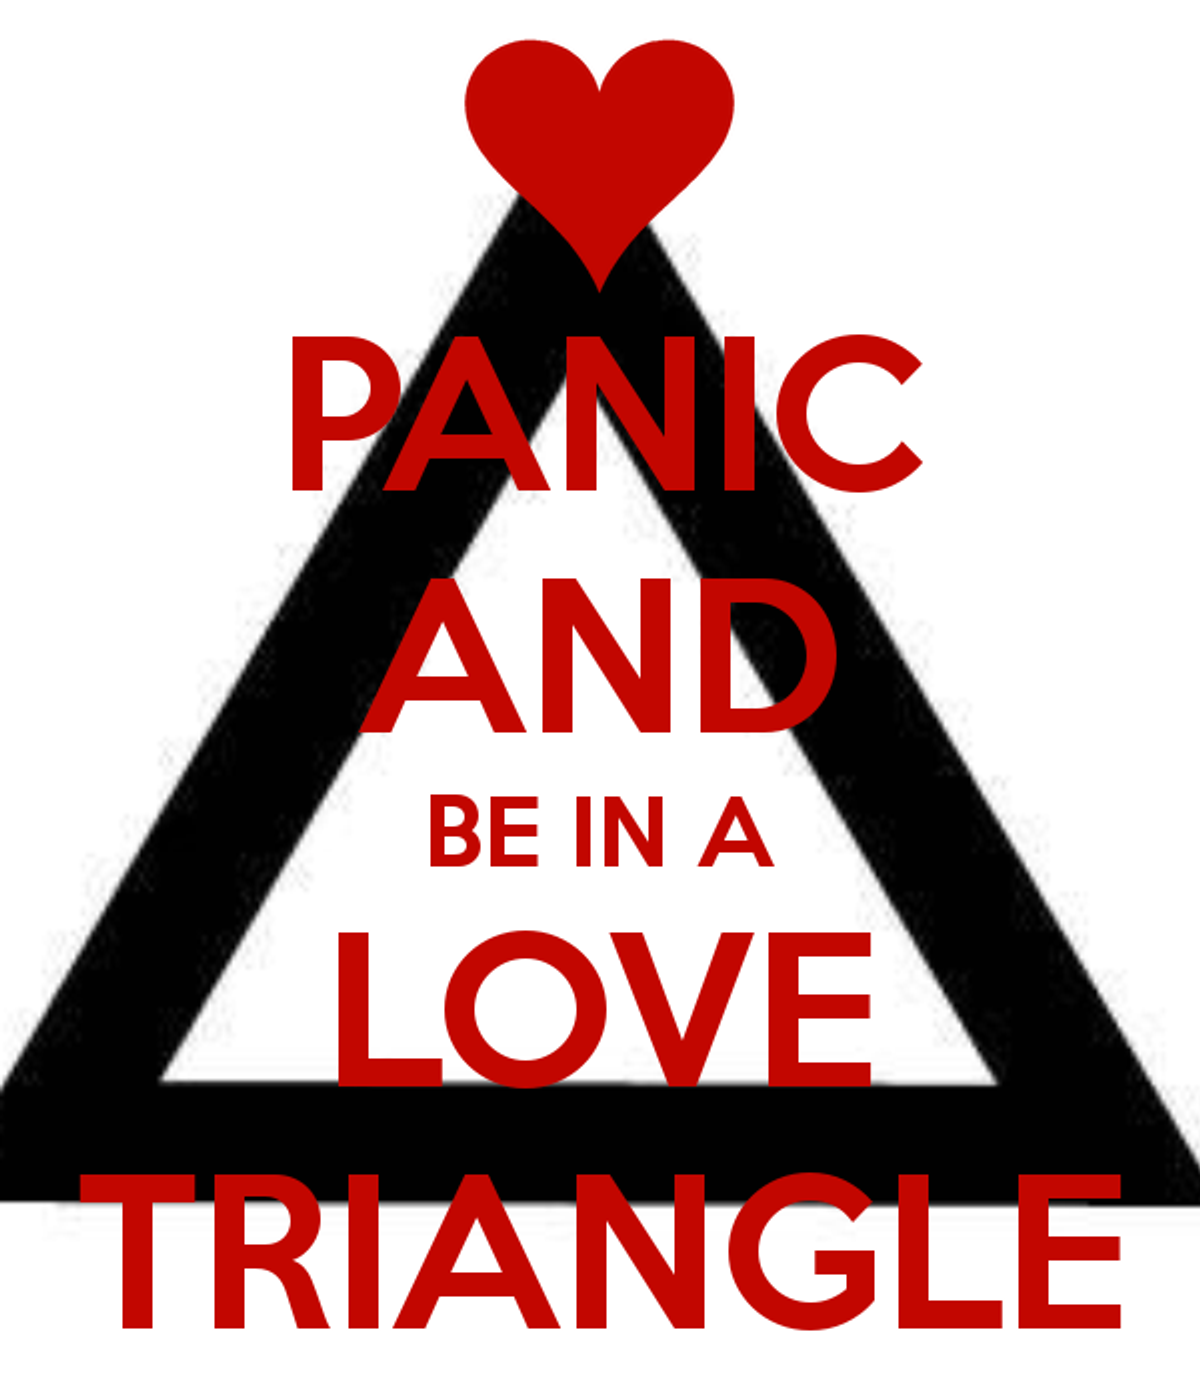 How To Deal With A "Love Triangle"